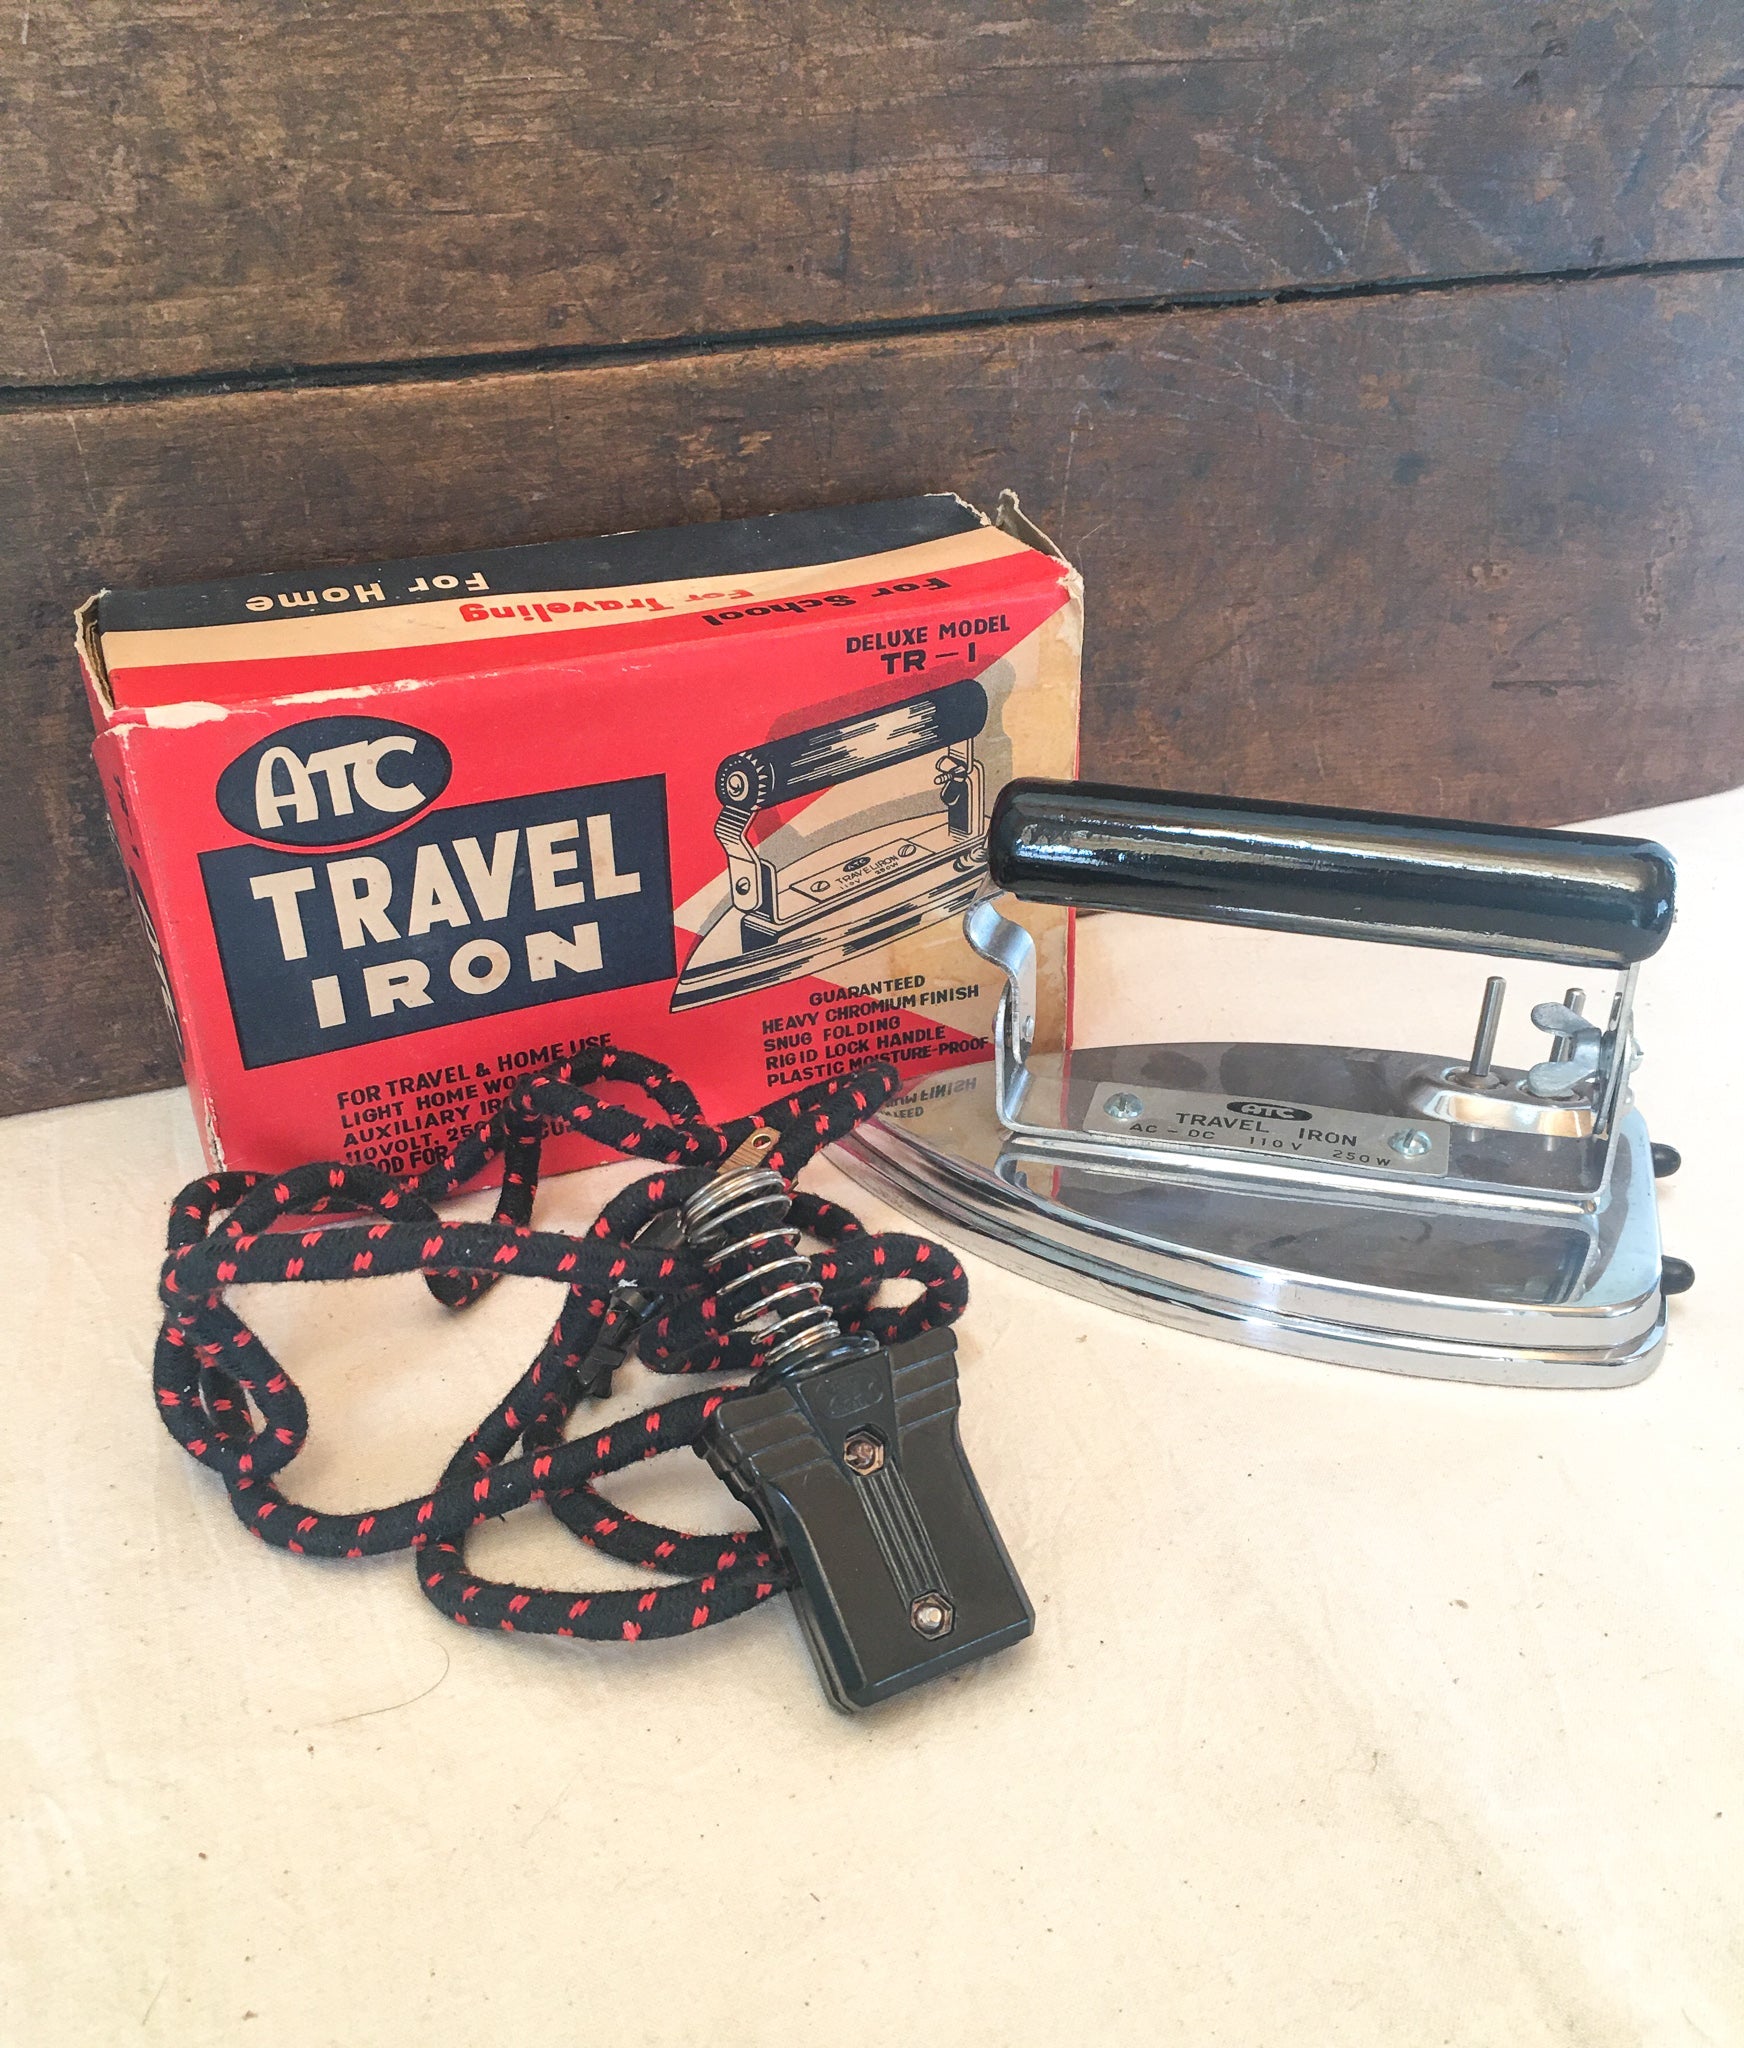 LeHay's Vintage, 1940’s ATC Travel Iron with Original Box, Cord and Instructions